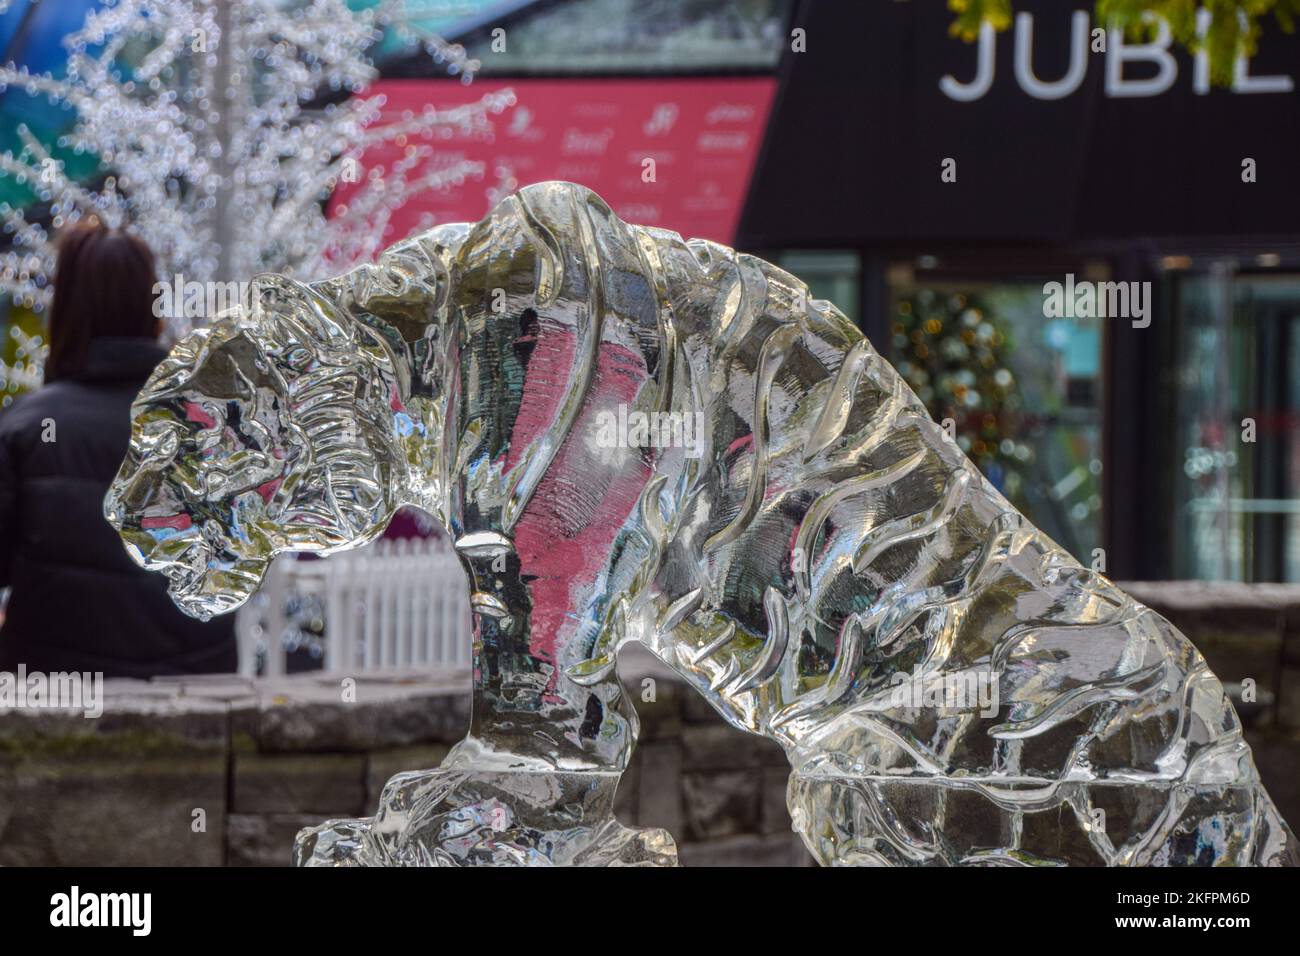 https://c8.alamy.com/comp/2KFPM6D/london-uk-19th-november-2022-tiger-ice-sculpture-sculptors-created-ice-sculptures-of-animals-in-canary-wharf-as-part-of-the-winter-ice-event-which-aims-to-highlight-the-urgency-of-protecting-endangered-species-worldwide-credit-vuk-valcicalamy-live-news-2KFPM6D.jpg